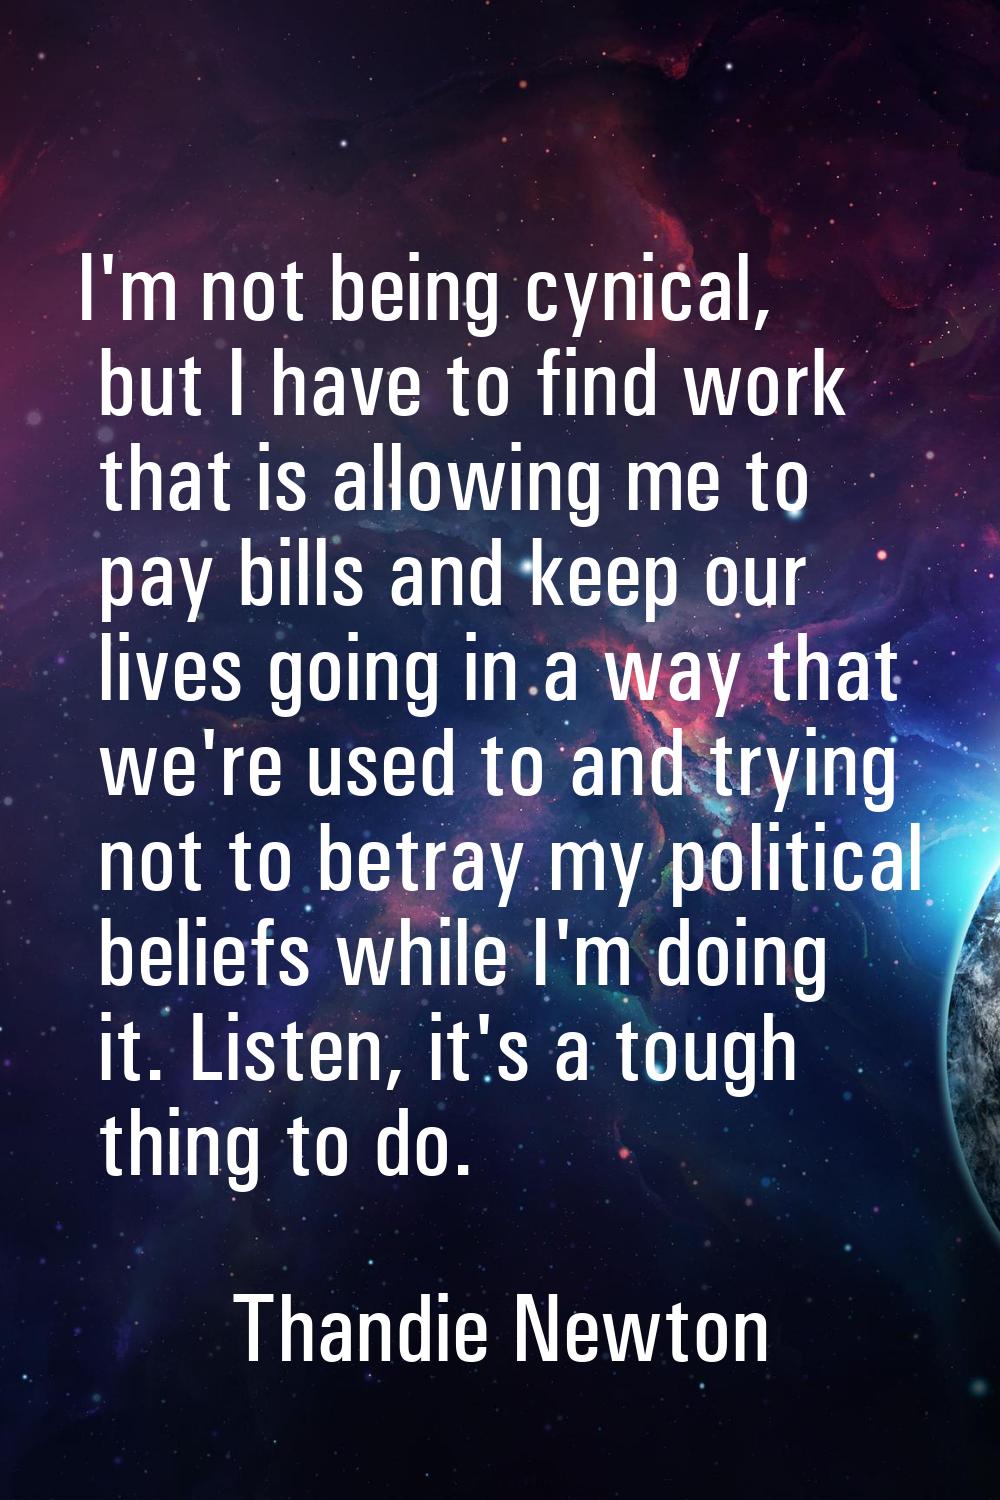 I'm not being cynical, but I have to find work that is allowing me to pay bills and keep our lives 